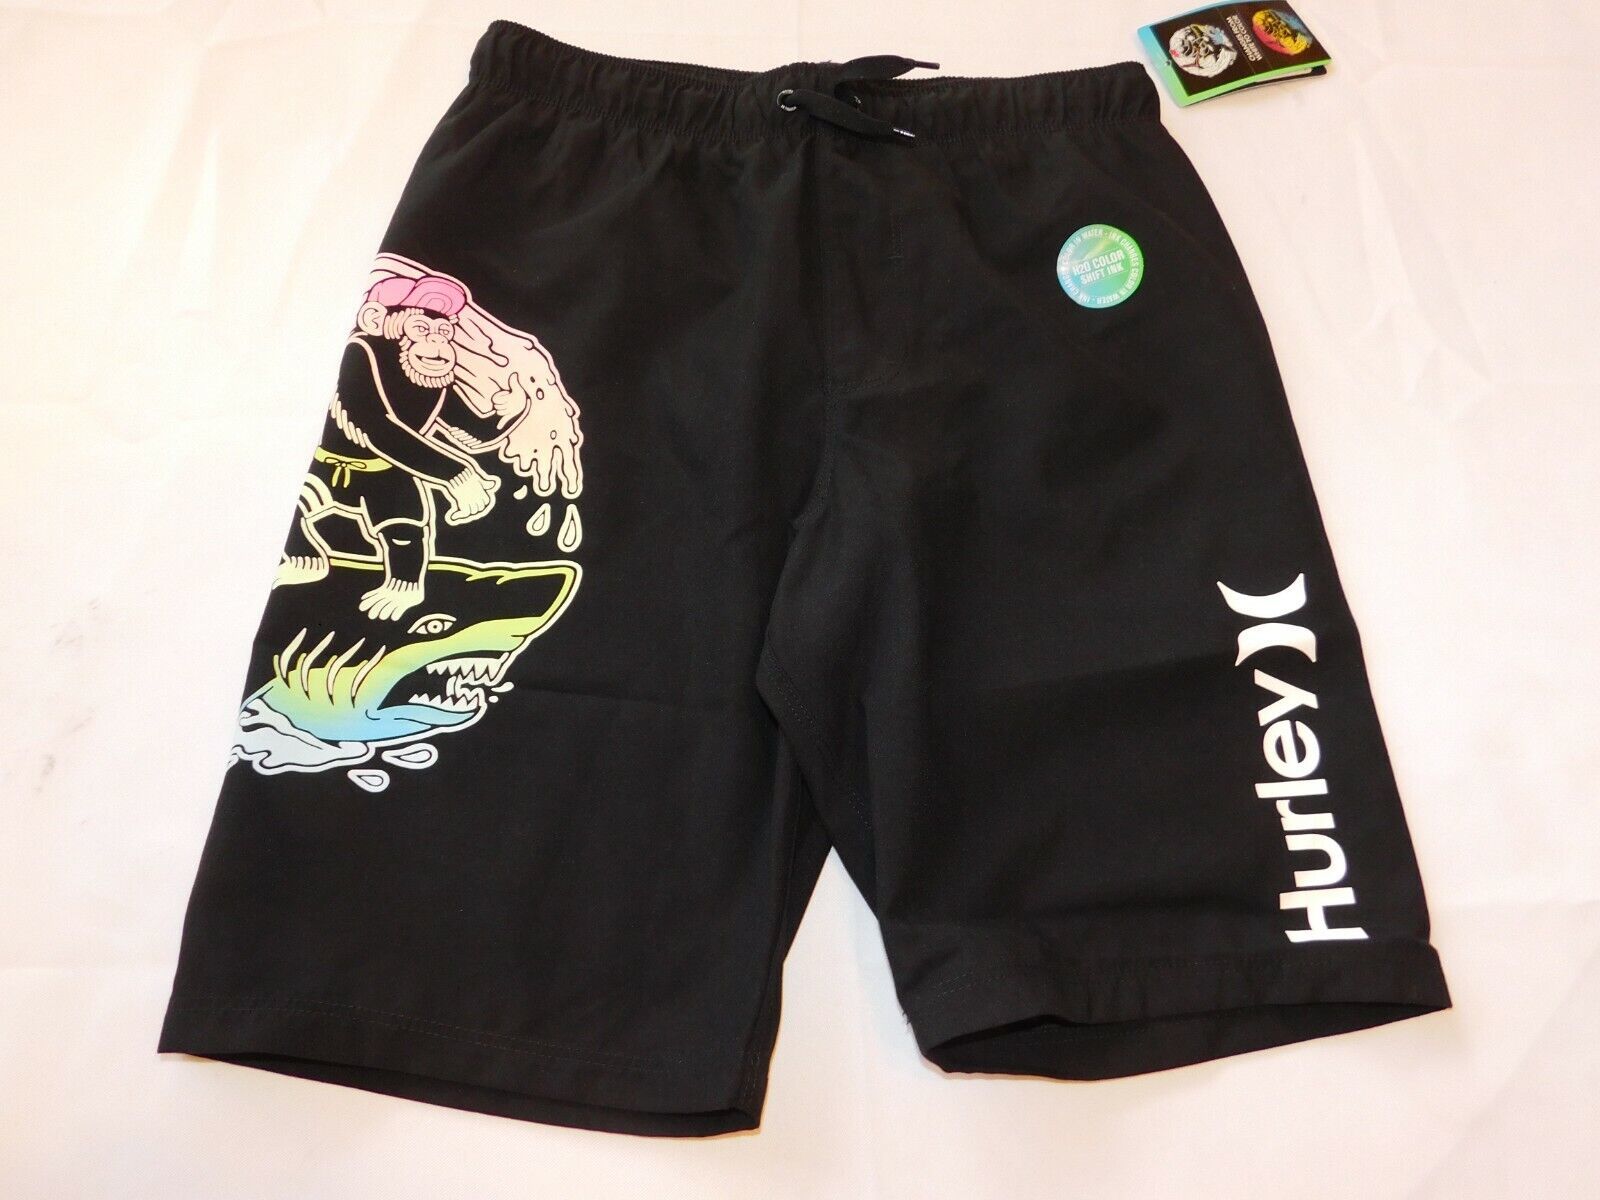 Primary image for Hurley Youth Boy's Board Shorts Swim 983932-023 Black Size Variations NWT